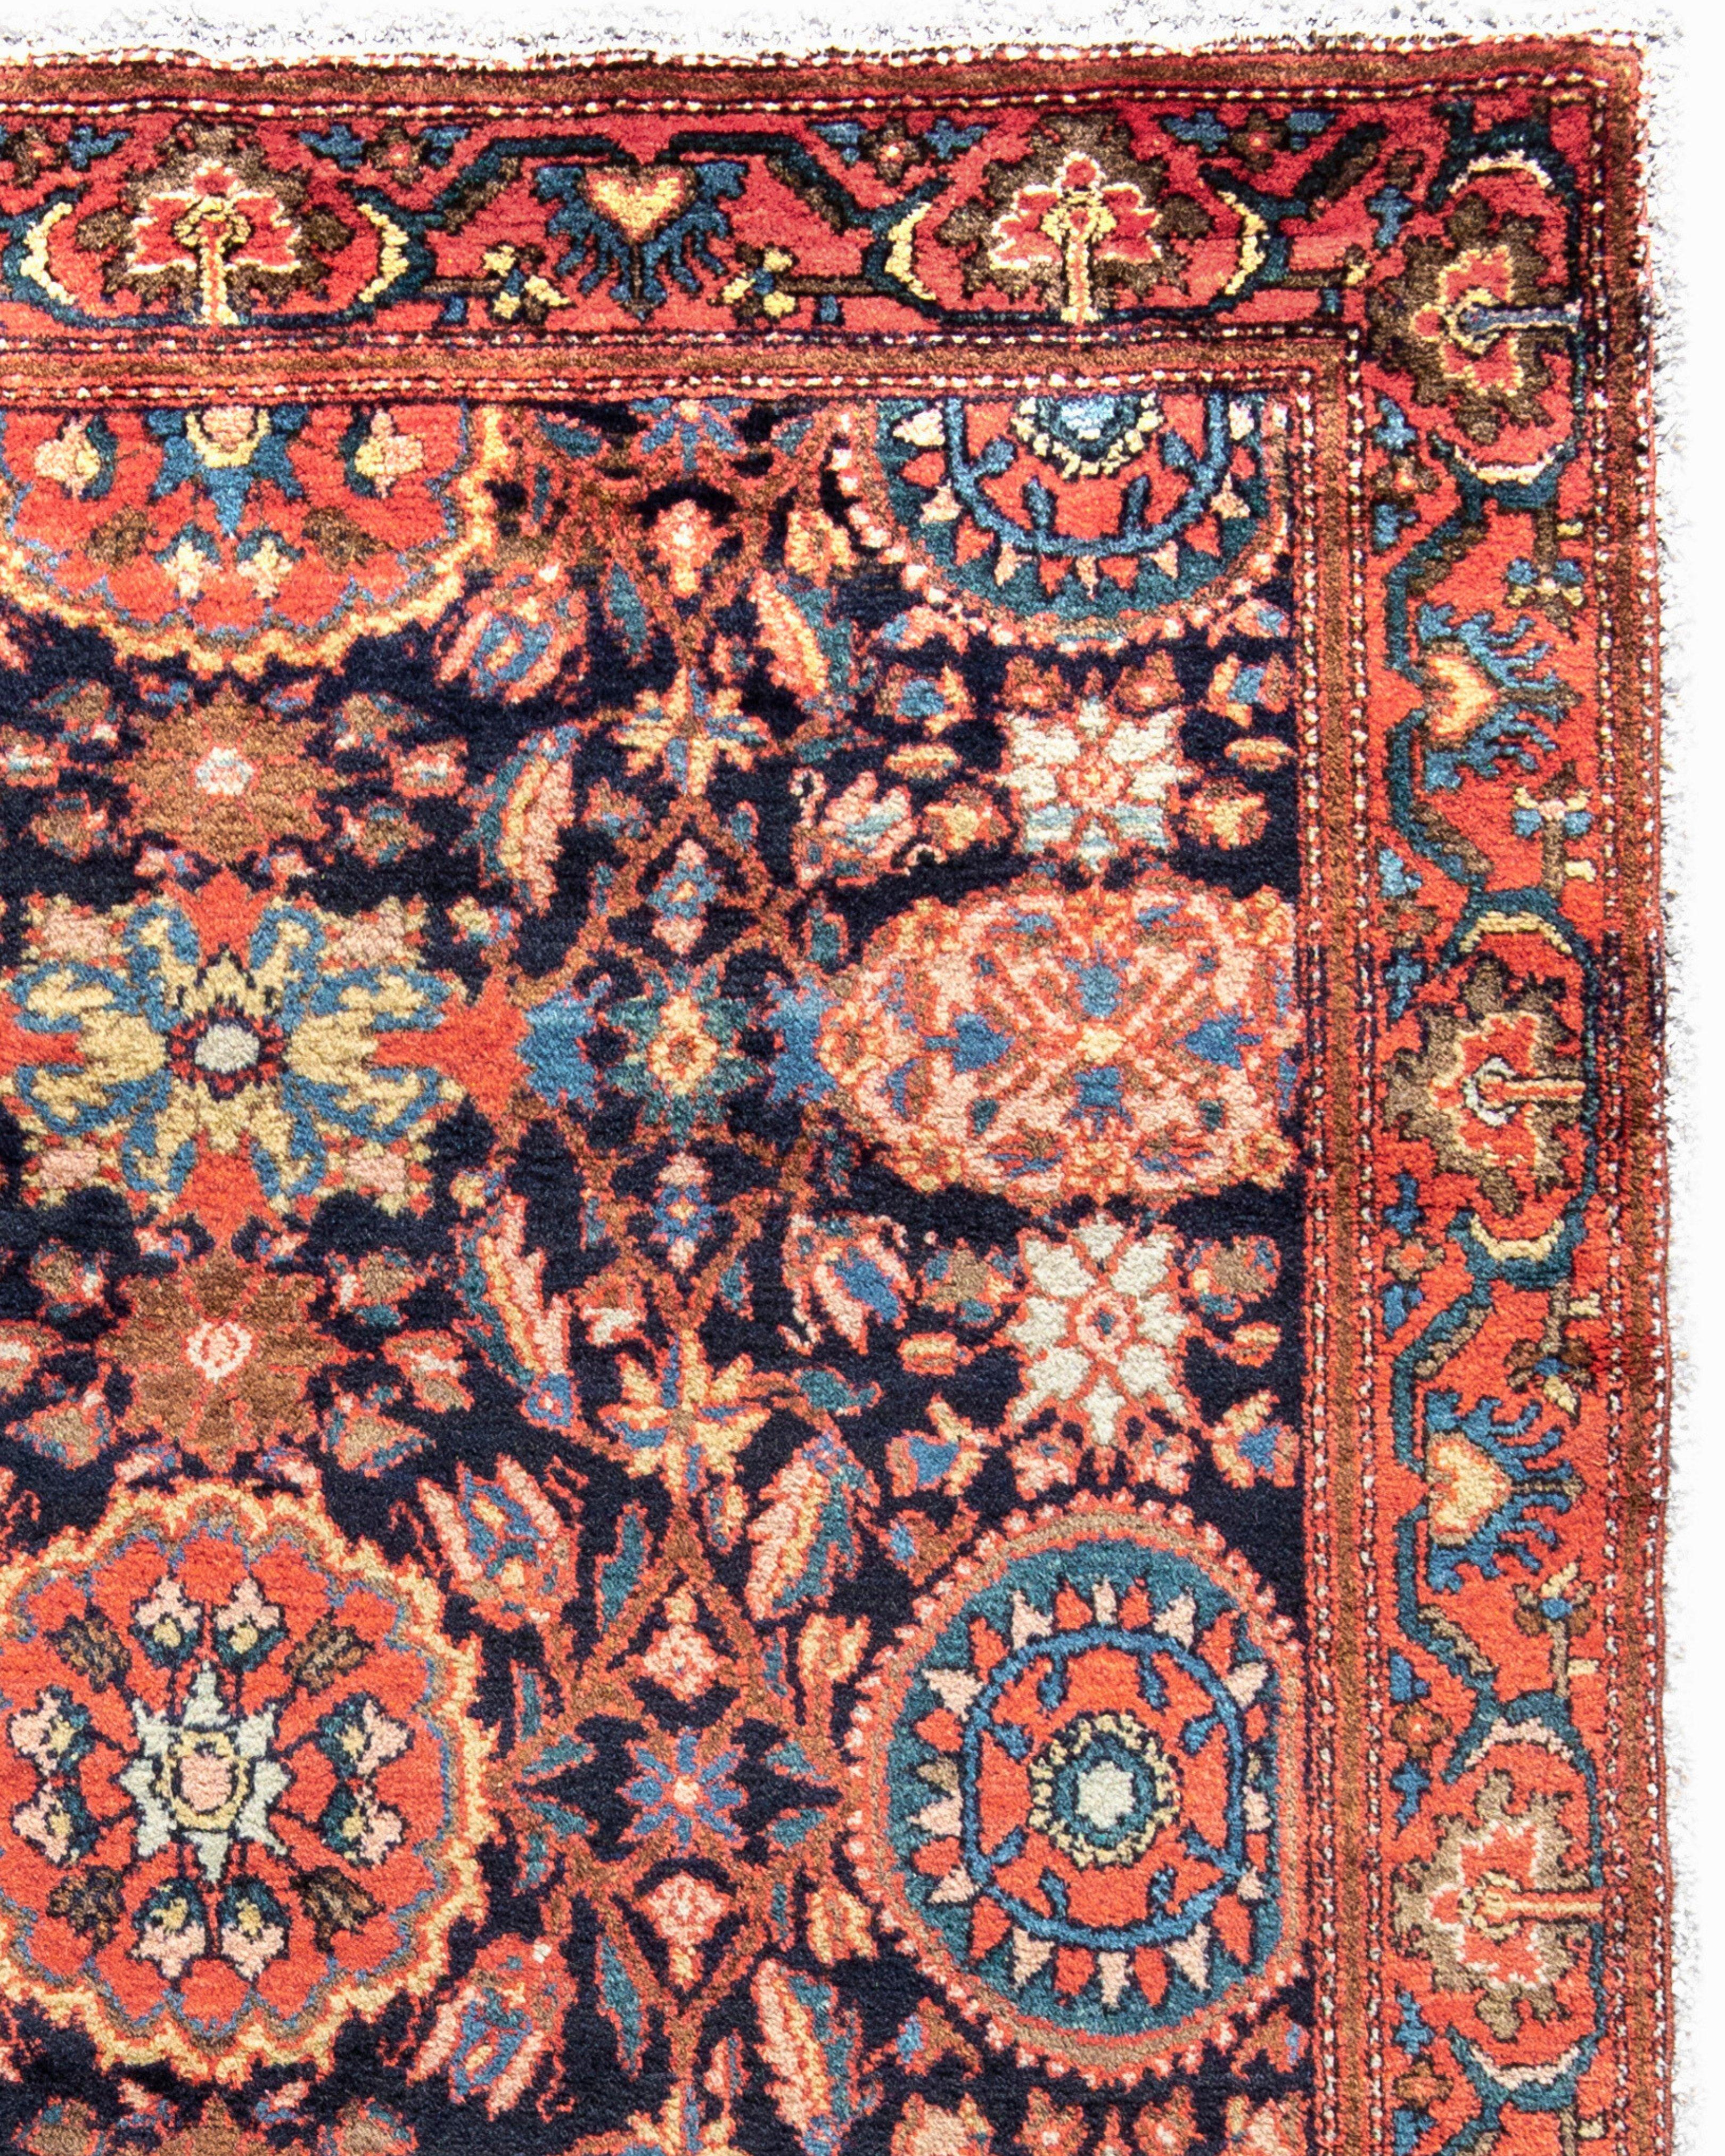 Antique Persian Malayer Rug, c. 1900

Additional Information:
Dimensions: 4'9